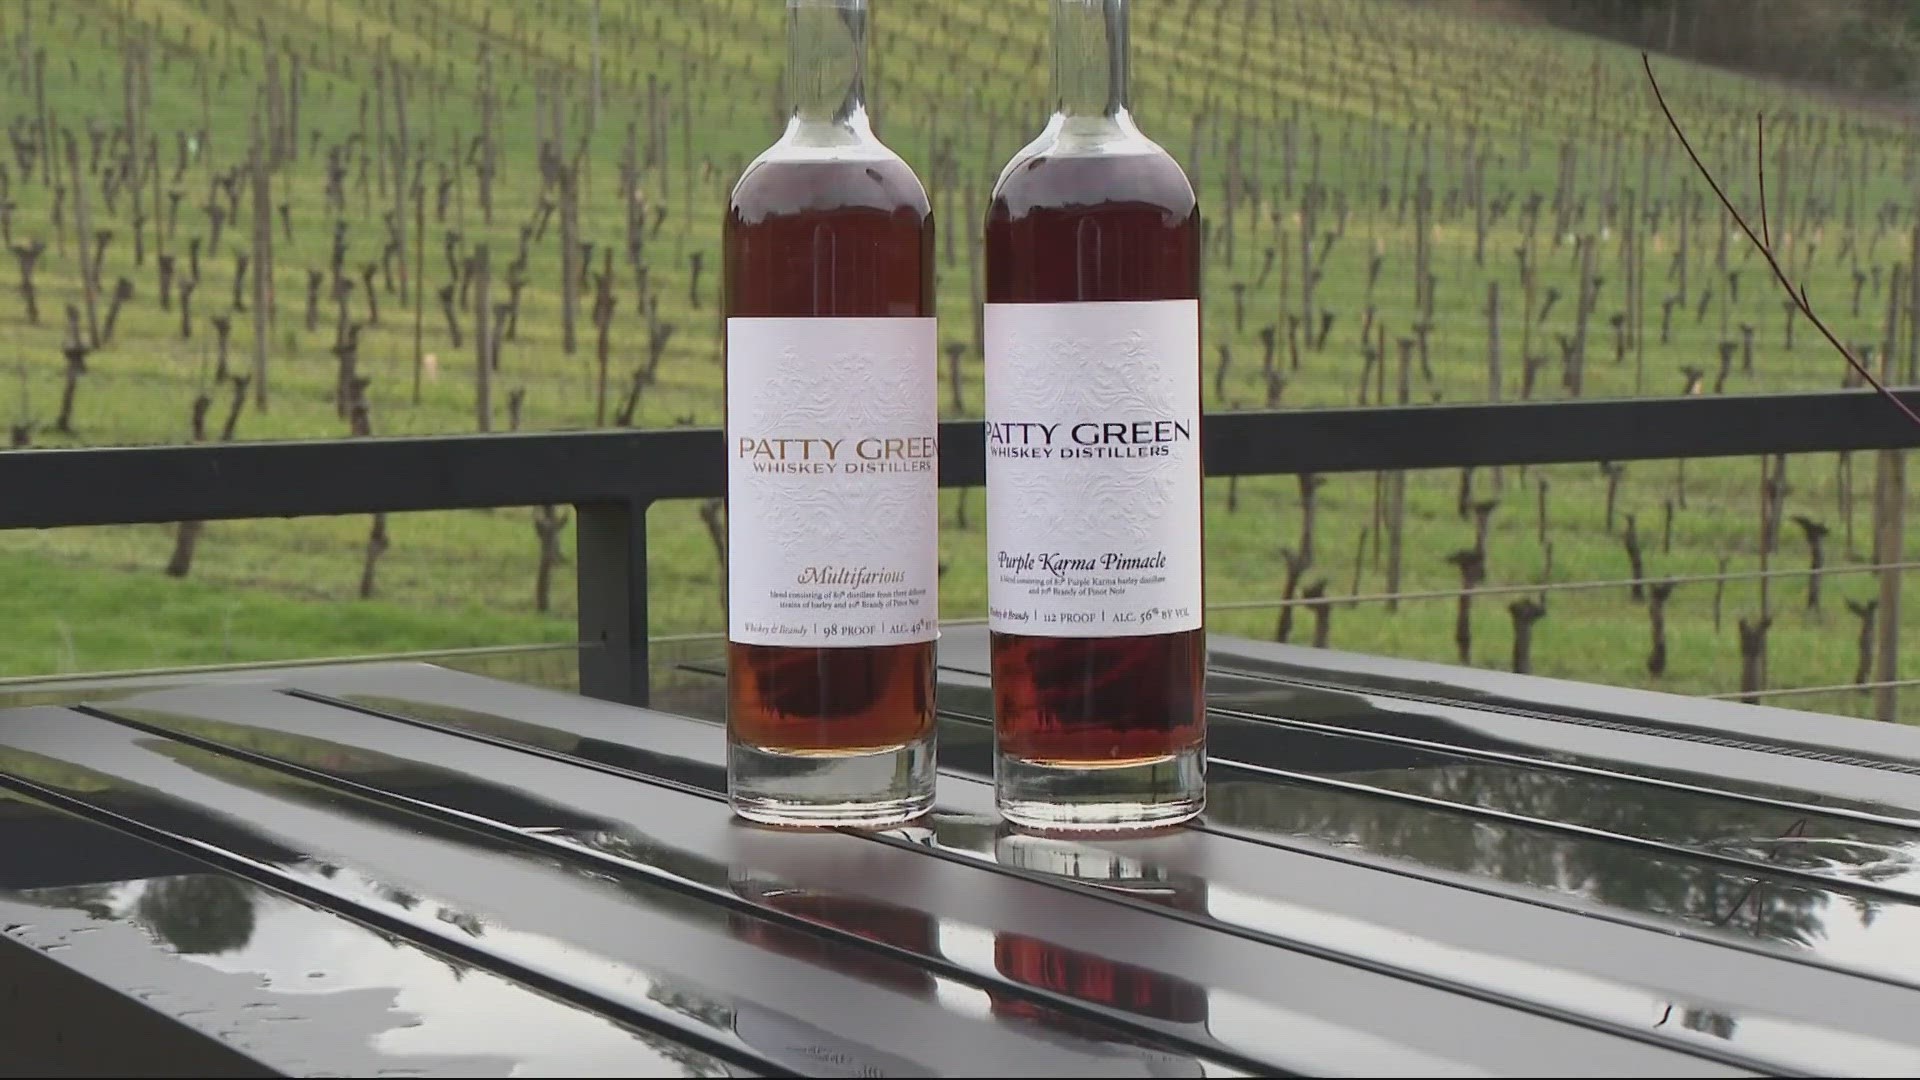 Wildfire smoke can taint grapes, making them unsuitable for wine production. But a Newberg winery teamed up with a distiller for a creative solution.